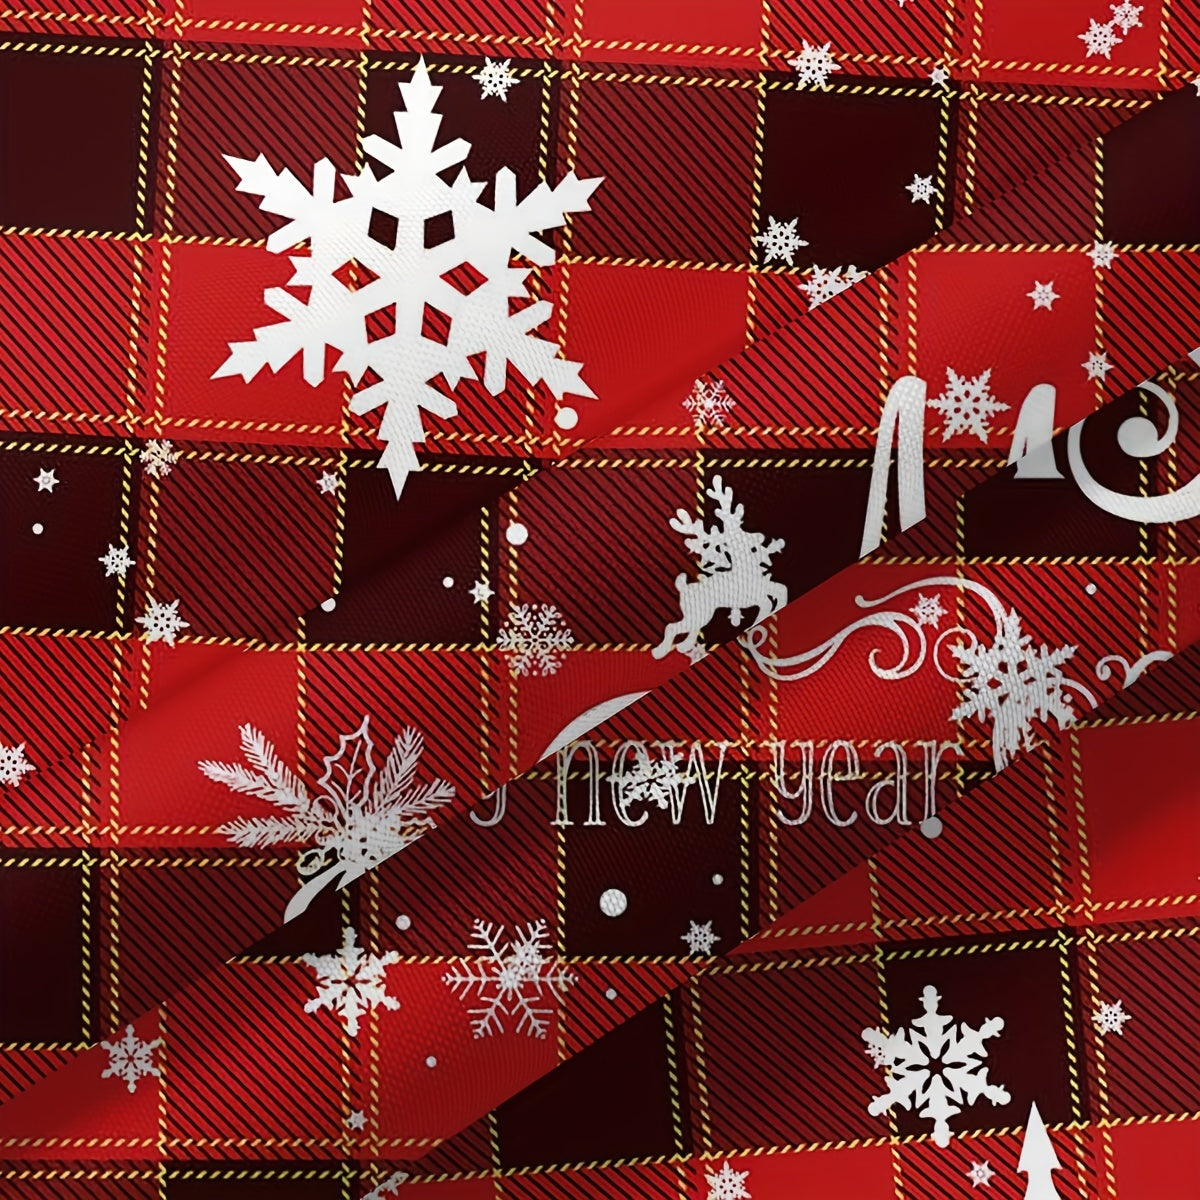 1pc, Polyester Table Cloth, Merry Christmas Table Cover, Red Black Plaid Snowflake Pattern Table Cover, Christmas Atmospheric Tablecloth, Holiday Desktop Decoration Fabric Table Cloth, Home Decoration, Christmas Decor, Gift